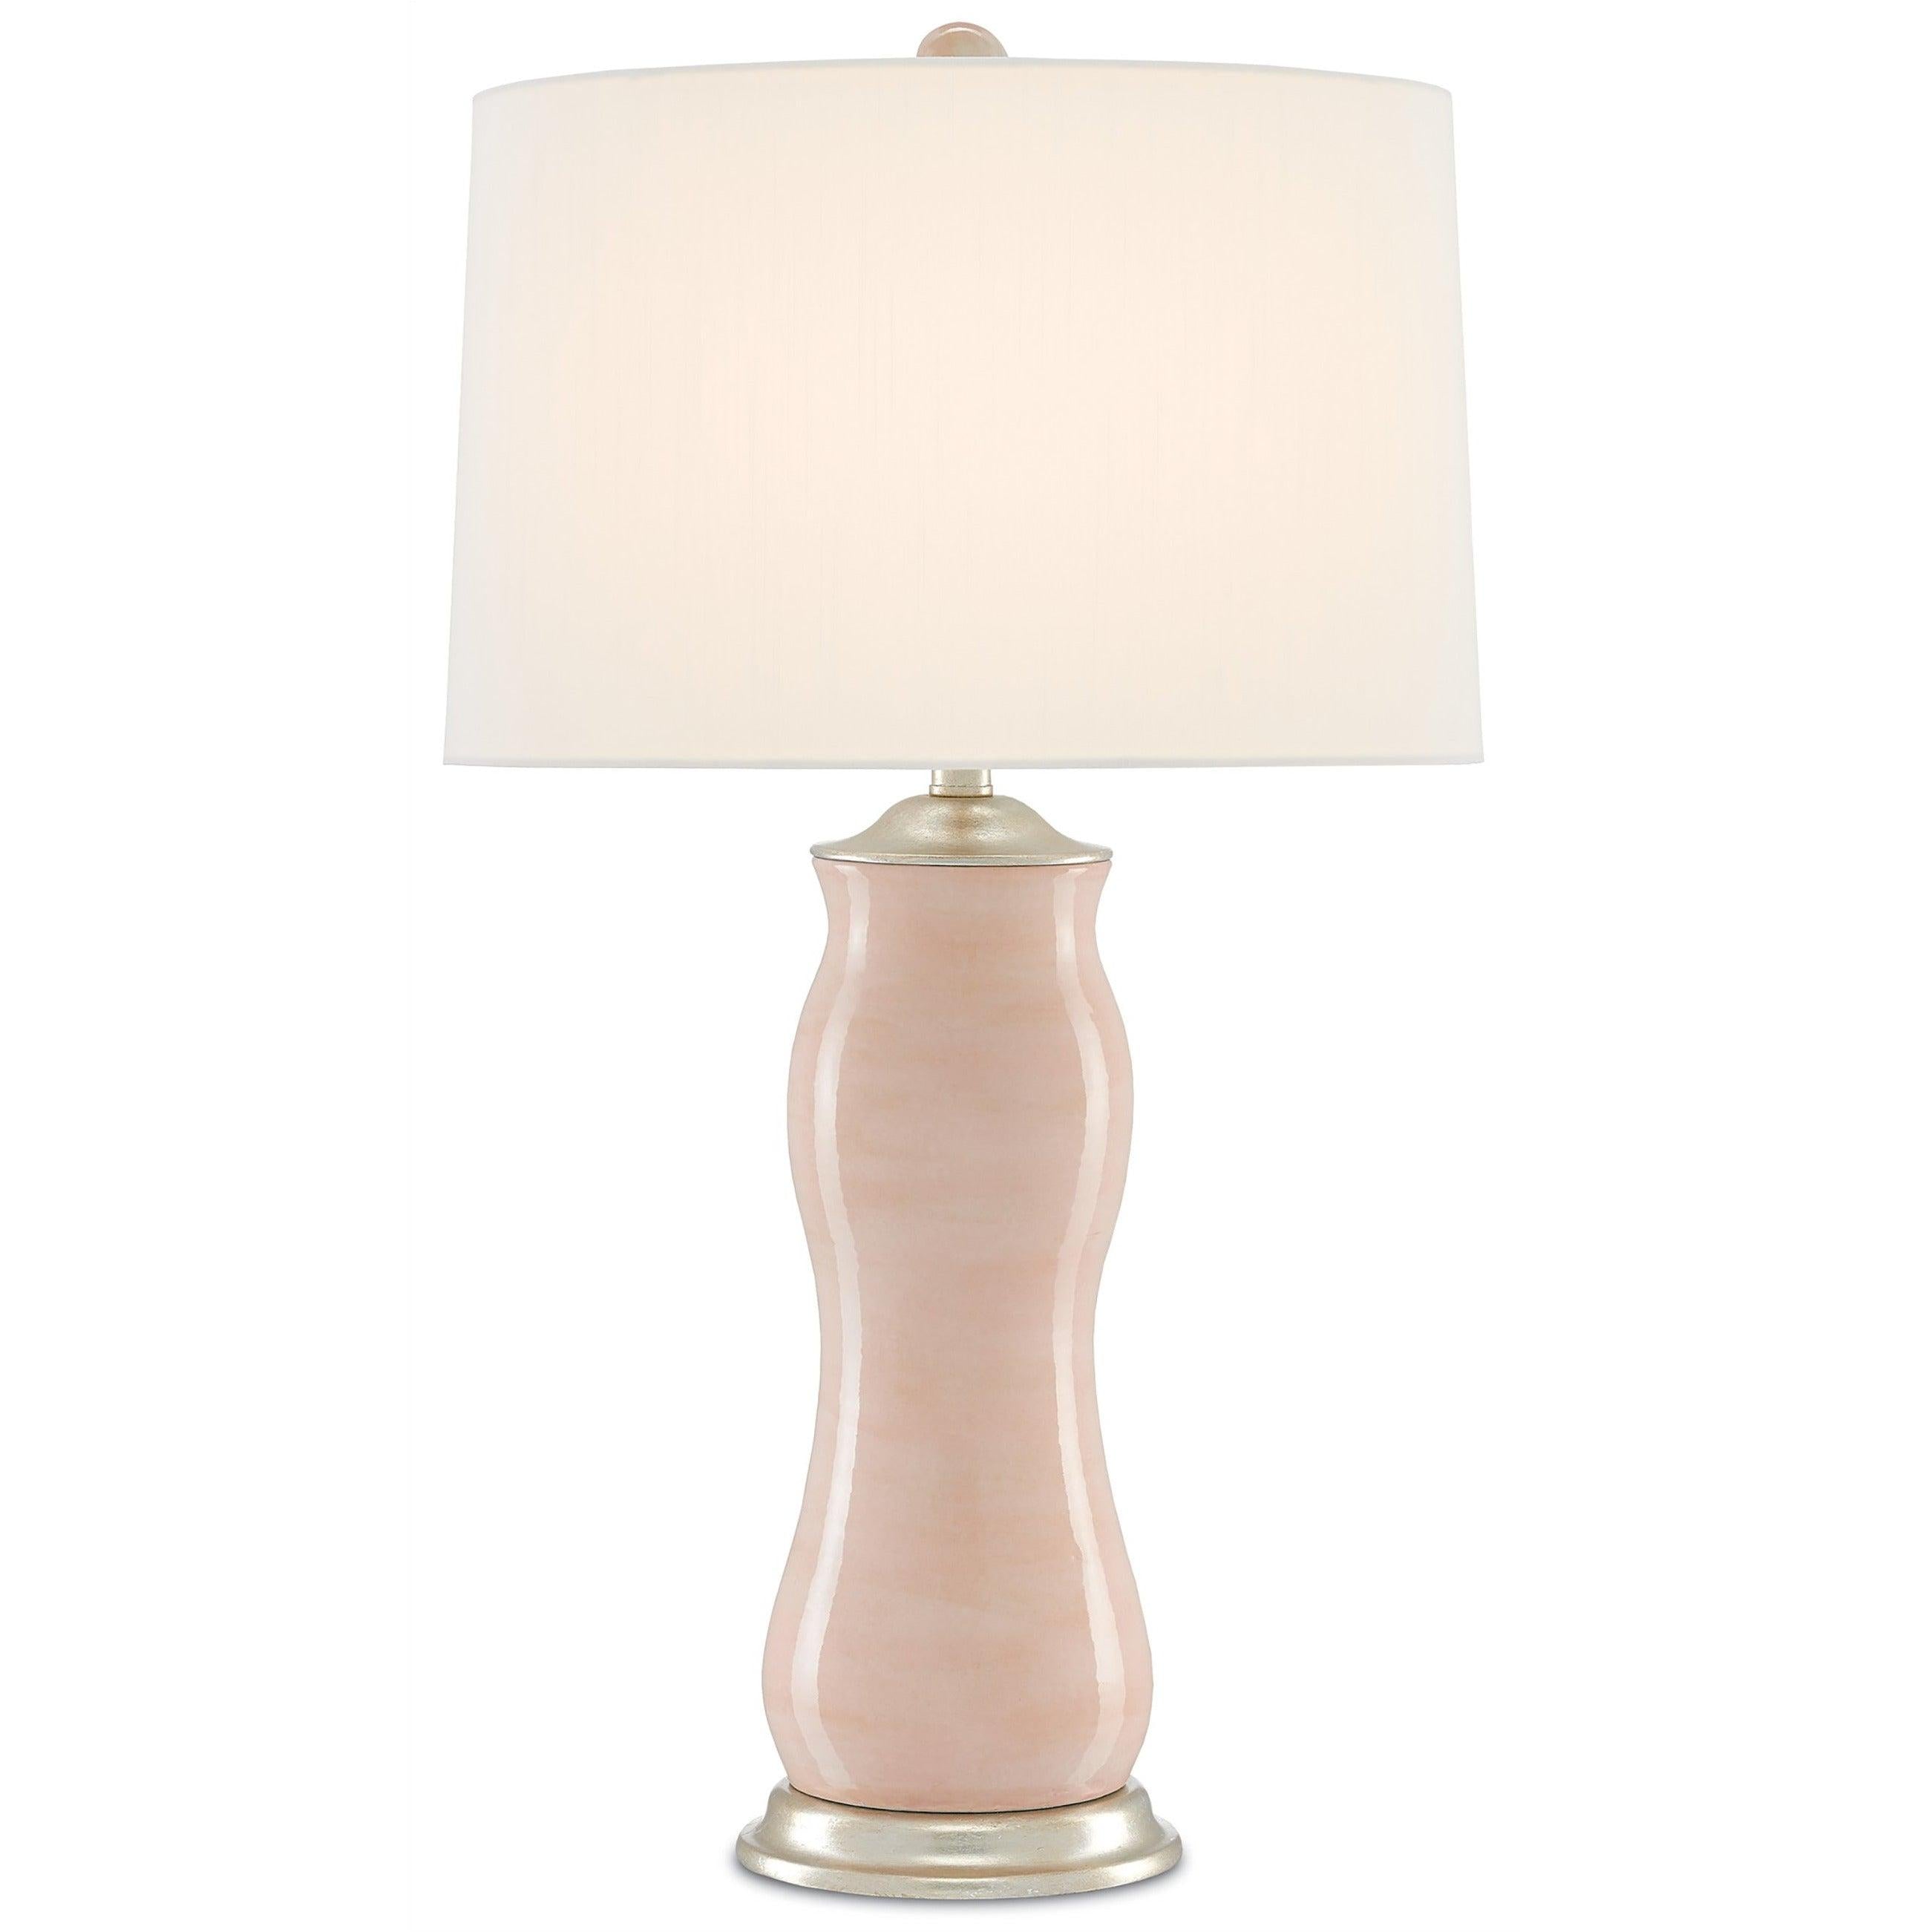 Currey and Company - Ondine Table Lamp - 6000-0236 | Montreal Lighting & Hardware